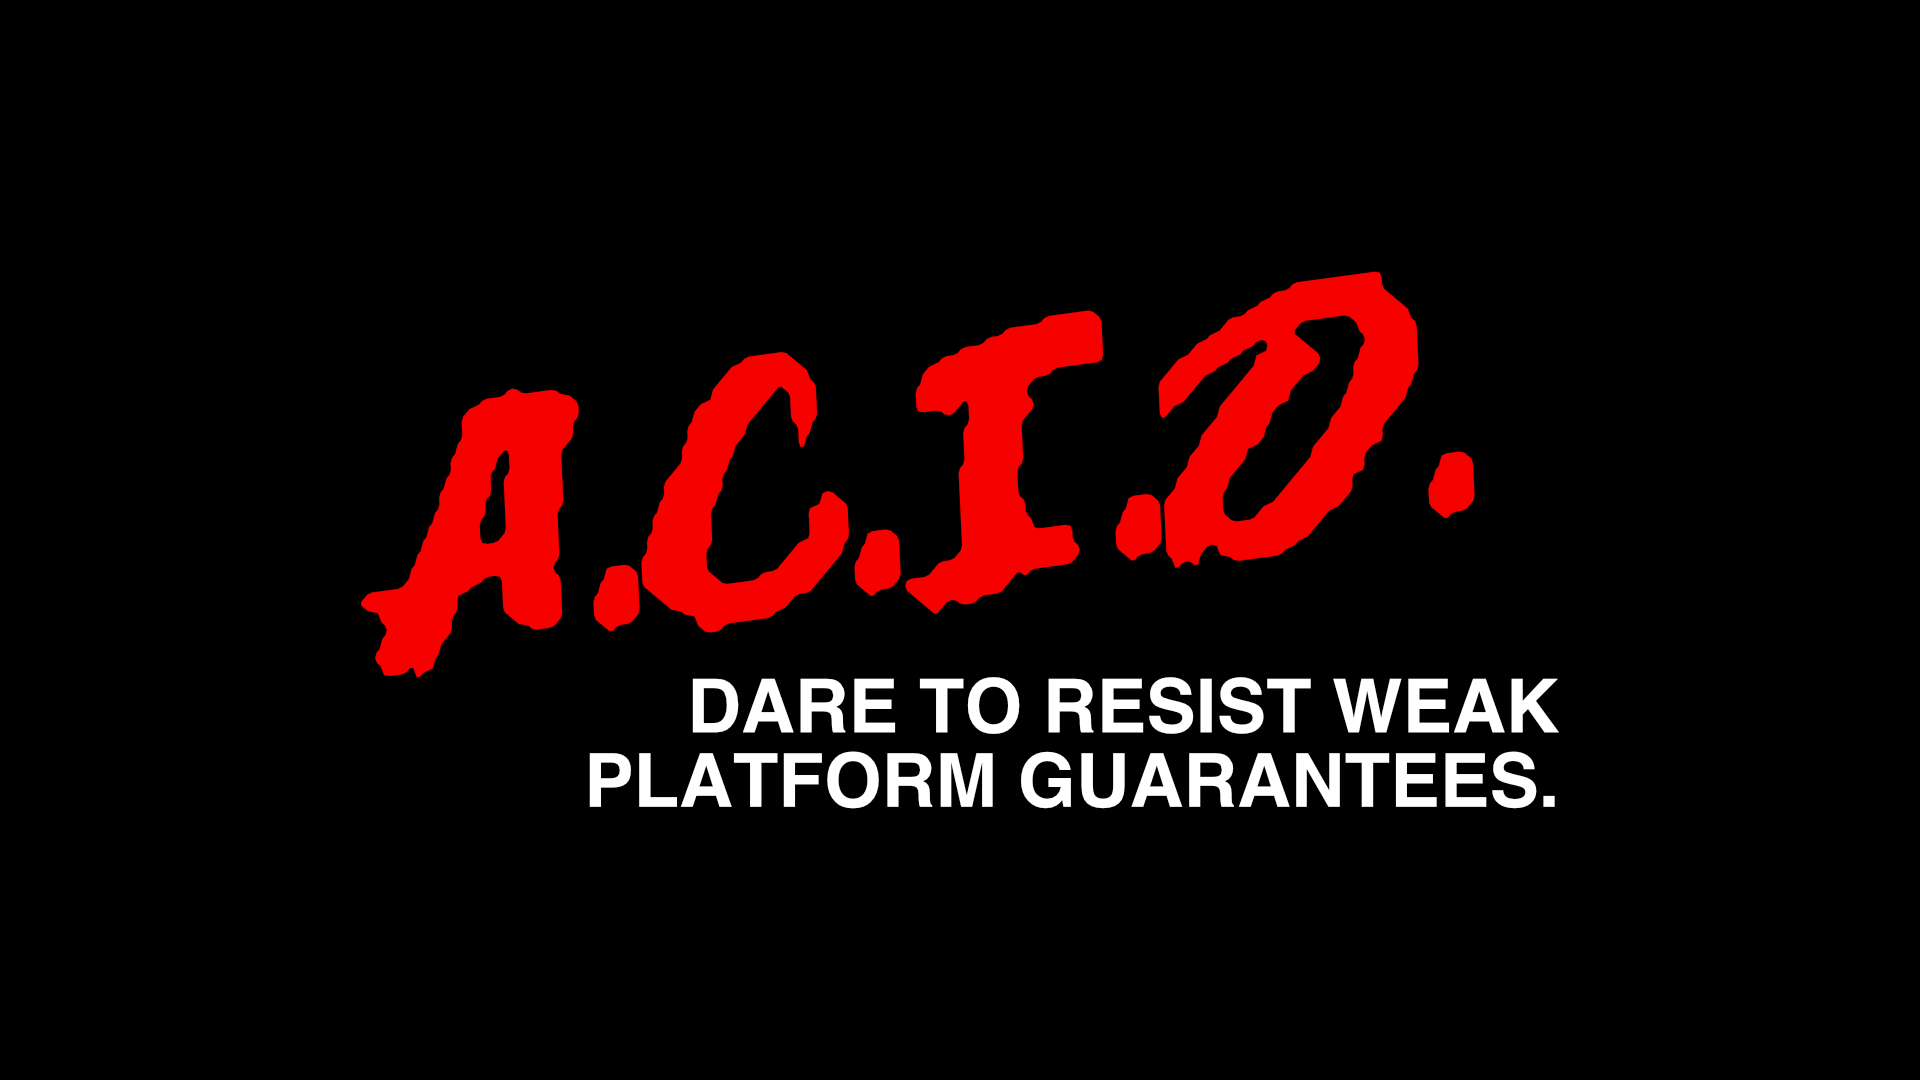 Dare to resist weak platform guarantees. A.C.I.D. in the style of a D.A.R.E. logo